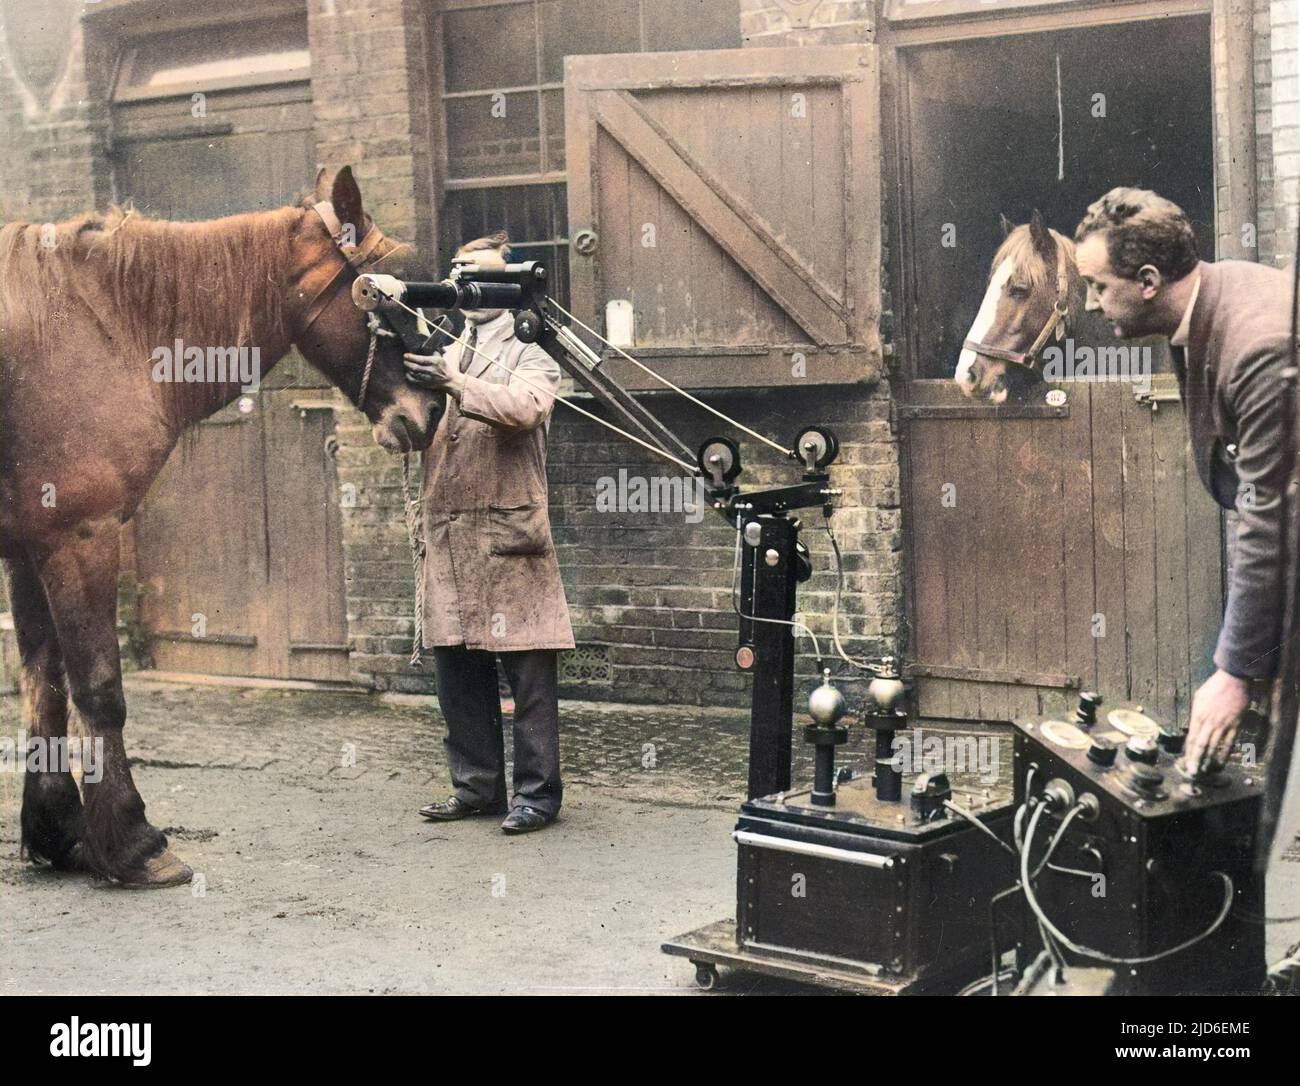 A horse being x-rayed at the Royal Veterinary College, Camden, London, using portable x-ray apparatus, which has proved invaluable in the treatment of animal ailments. Colourised version of : 10150403       Date: early 1930s Stock Photo